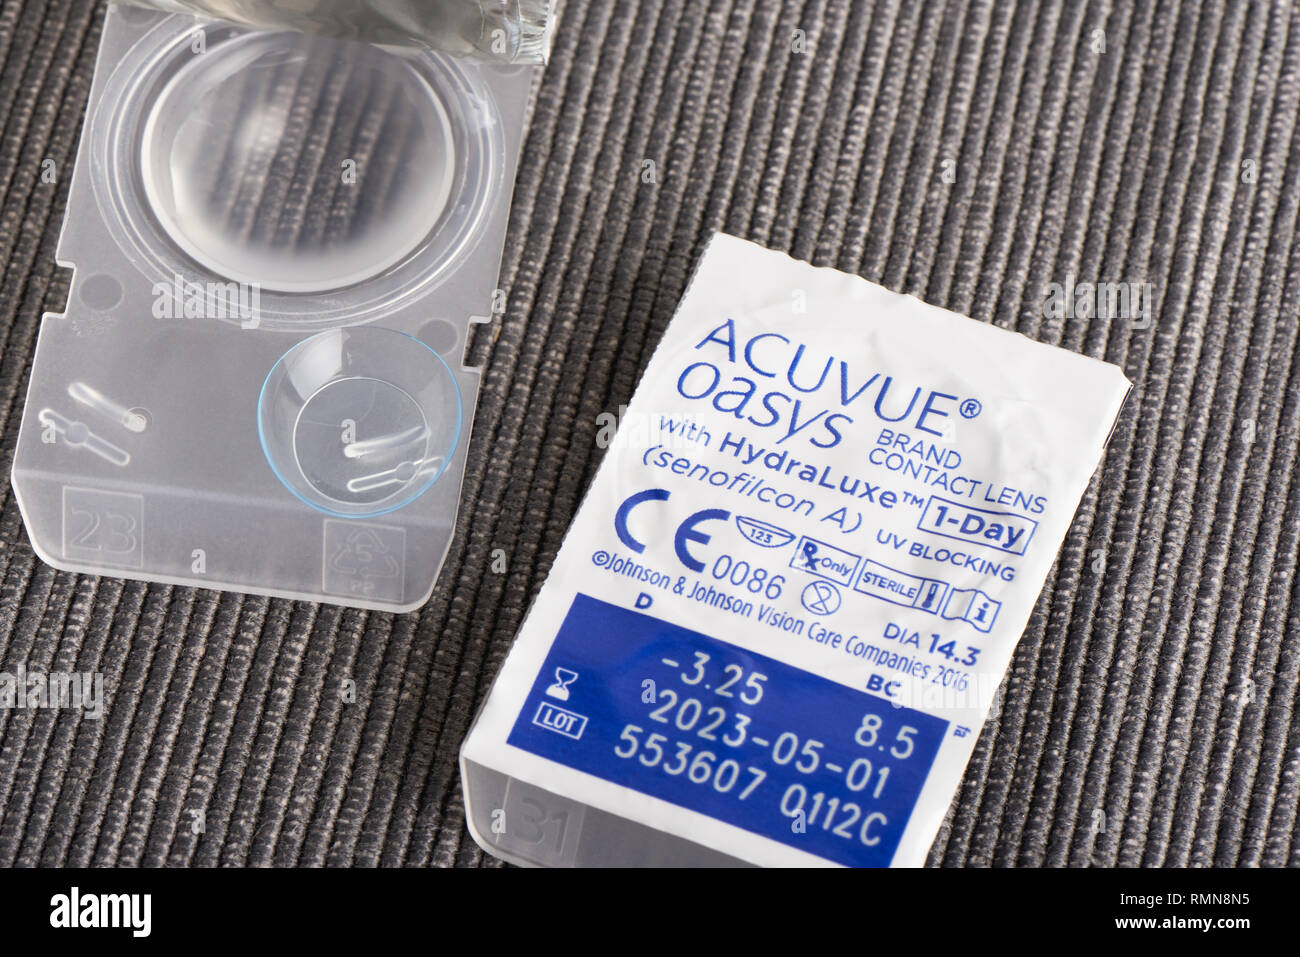 Gimpo, Korea - December 6, 2018: Johnson & Johnson Vision Care Acuvue Oasys contact lens, daily disposable silicone hydrogel released in July 2016. Stock Photo